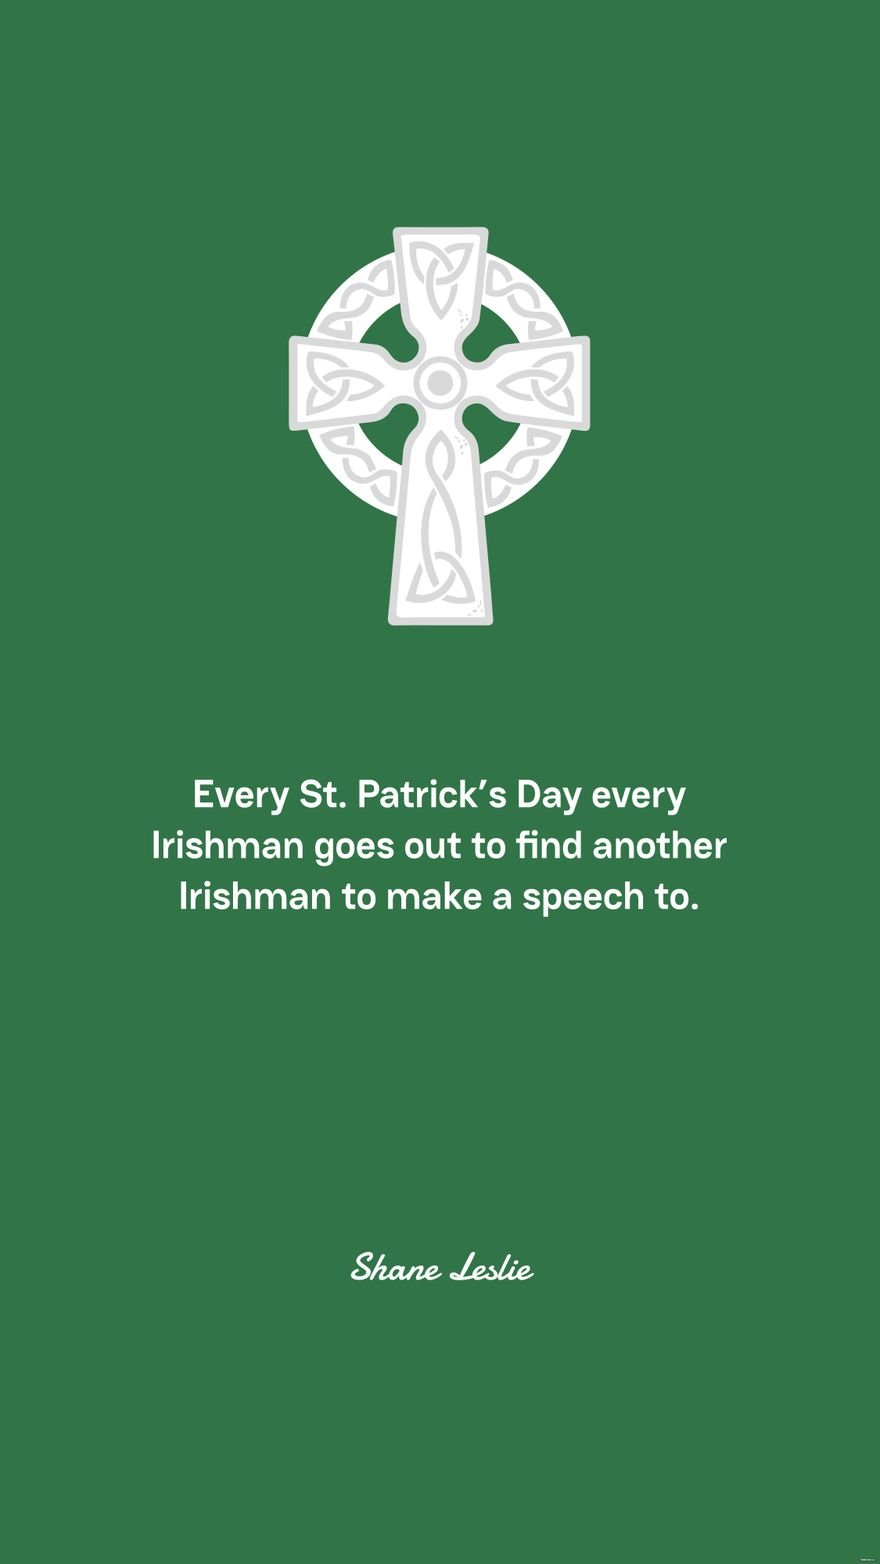 Shane Leslie - Every St. Patrick’s Day every Irishman goes out to find another Irishman to make a speech to.